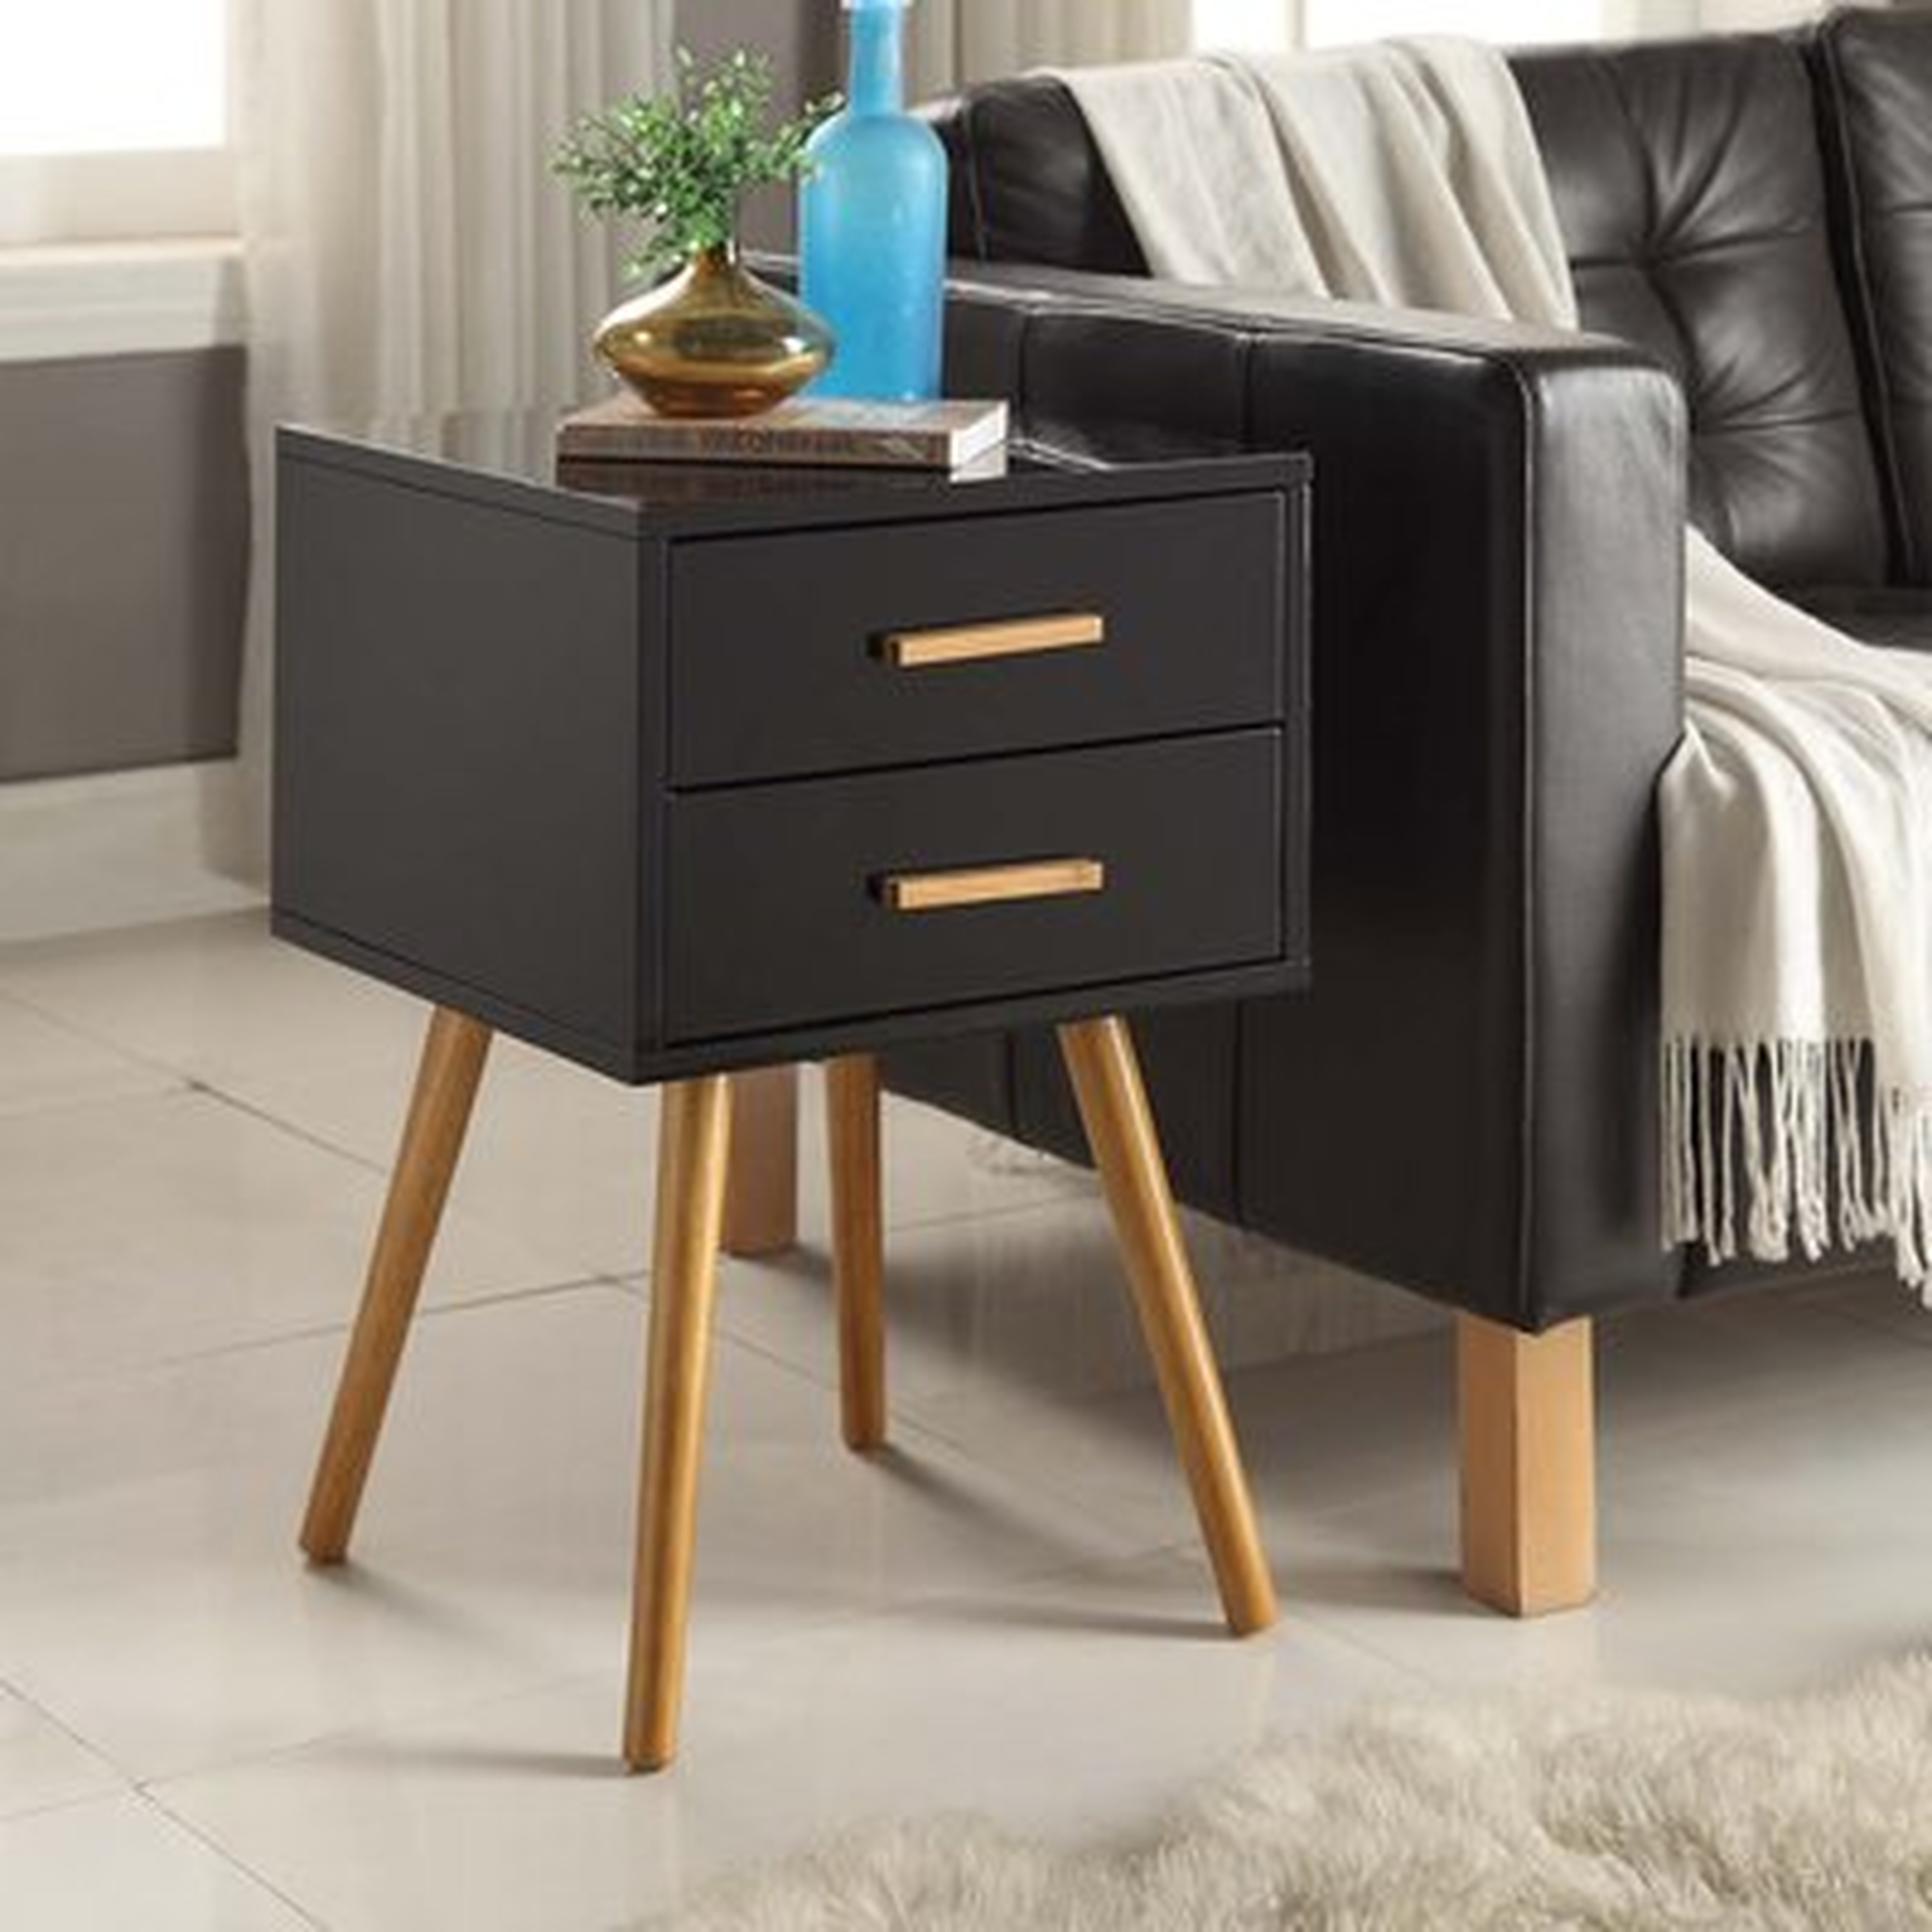 Delilah End Table With Storage - Wayfair